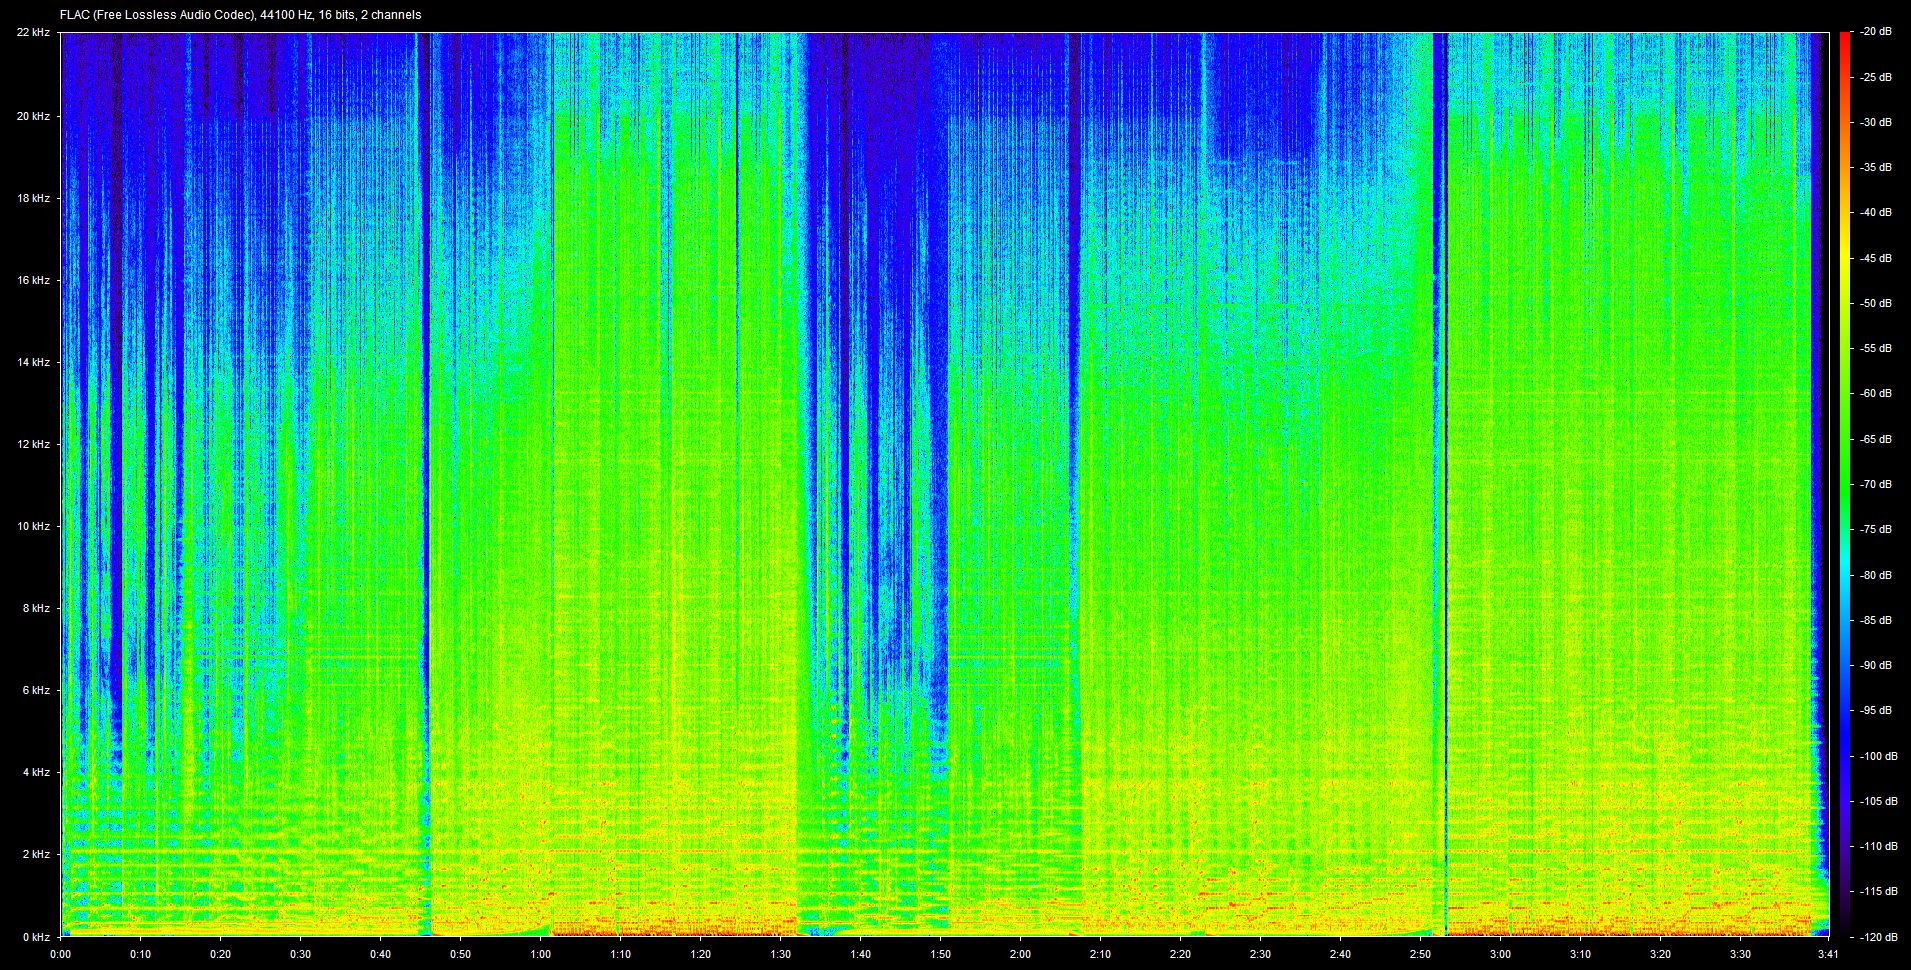 Spectrogram for a flac file